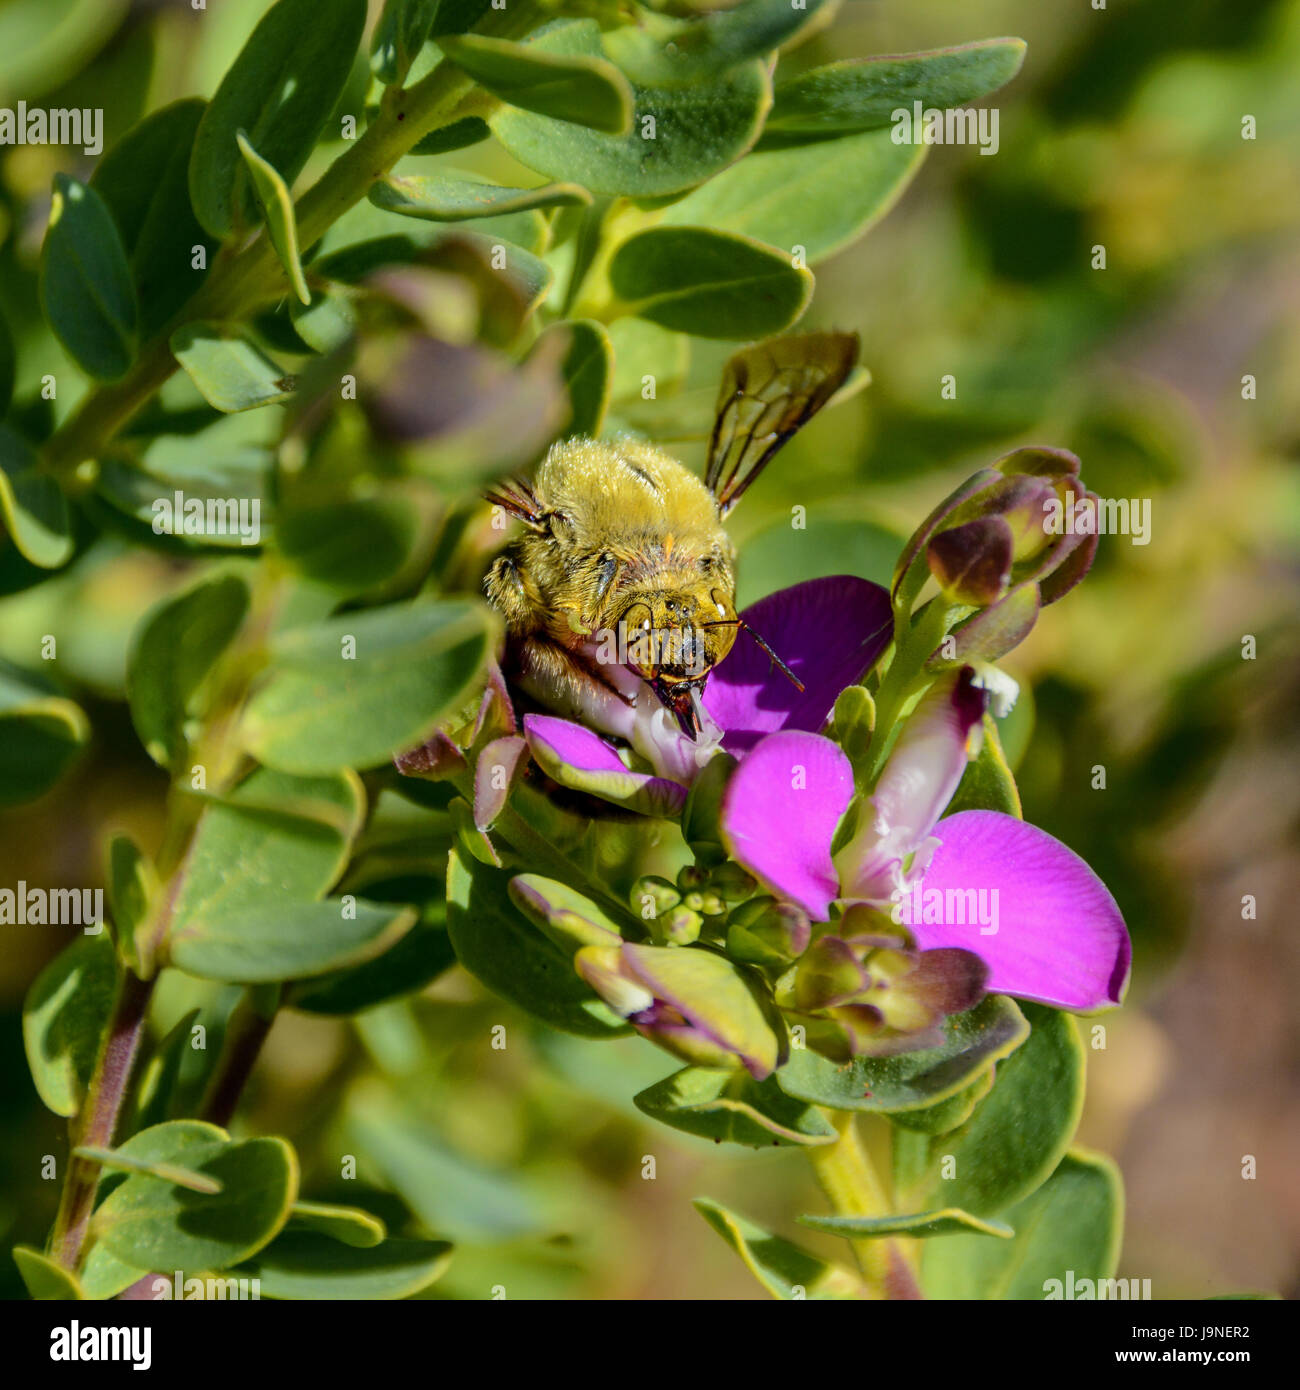 A male Carpenter Bee on a bush with pink flowers in Southern Africa Stock Photo